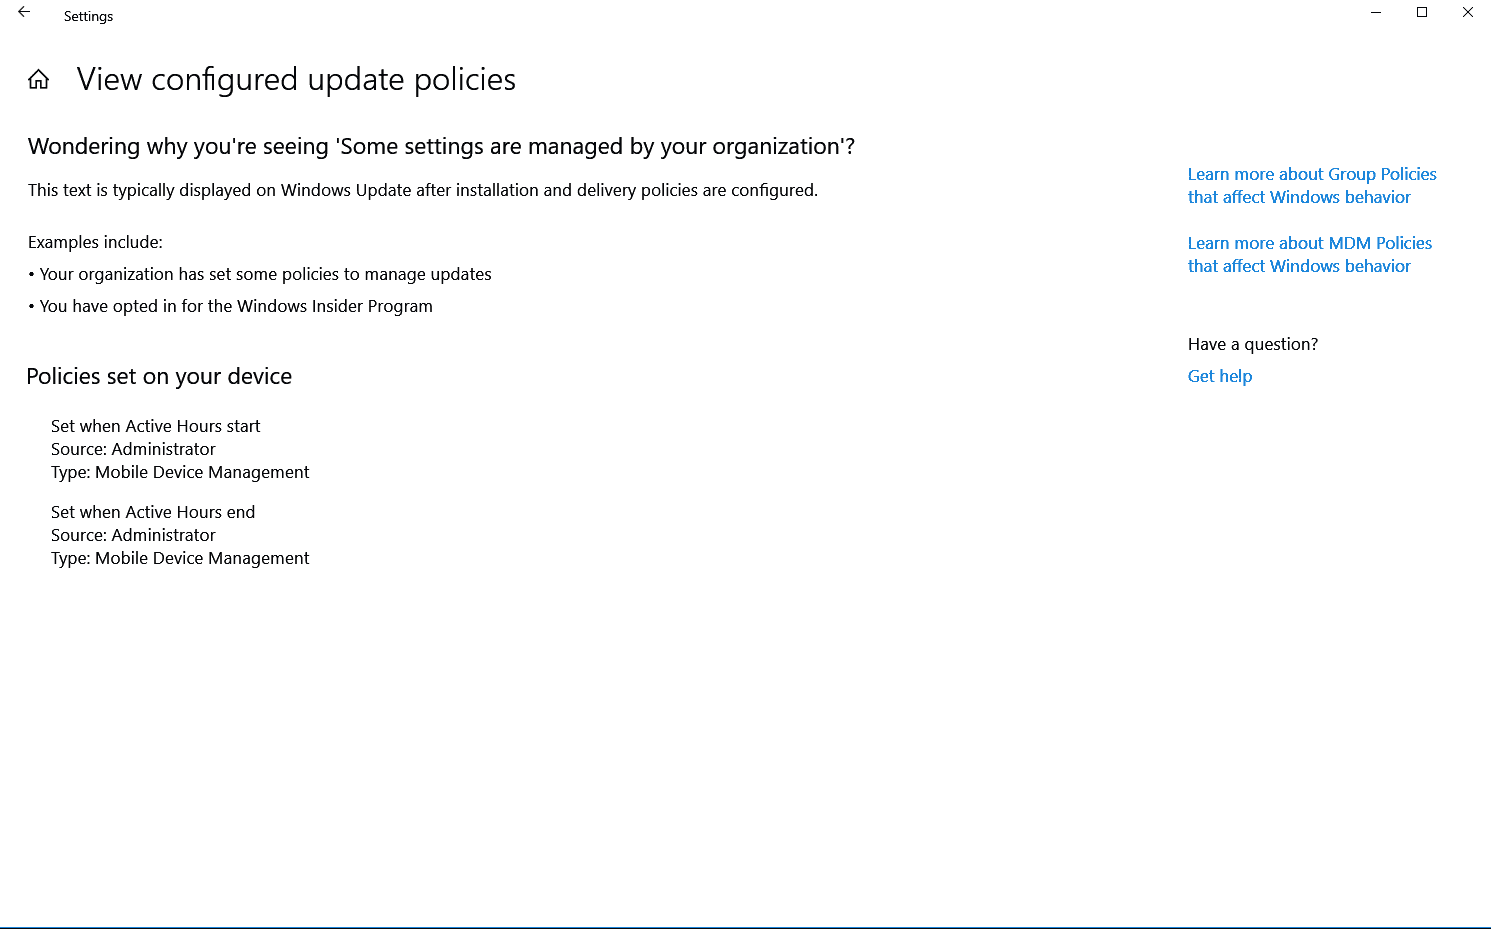 Windows10 Update "Some Settings are Managed by Your Organization" 875fafac-6adf-430e-b5a3-aa70a44121e9?upload=true.png